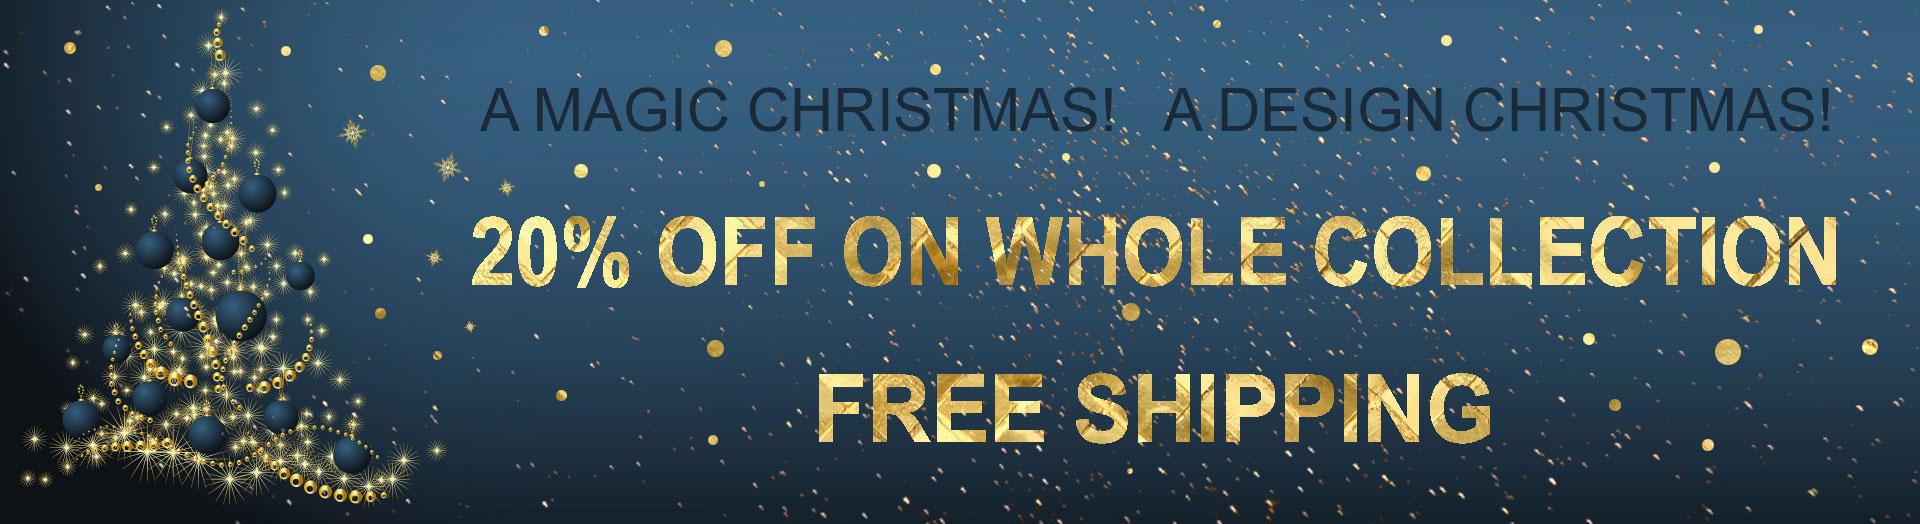 A magic Christmas! A design Christmas! 20% off on whole collection and free shipping - Italy Dream Design